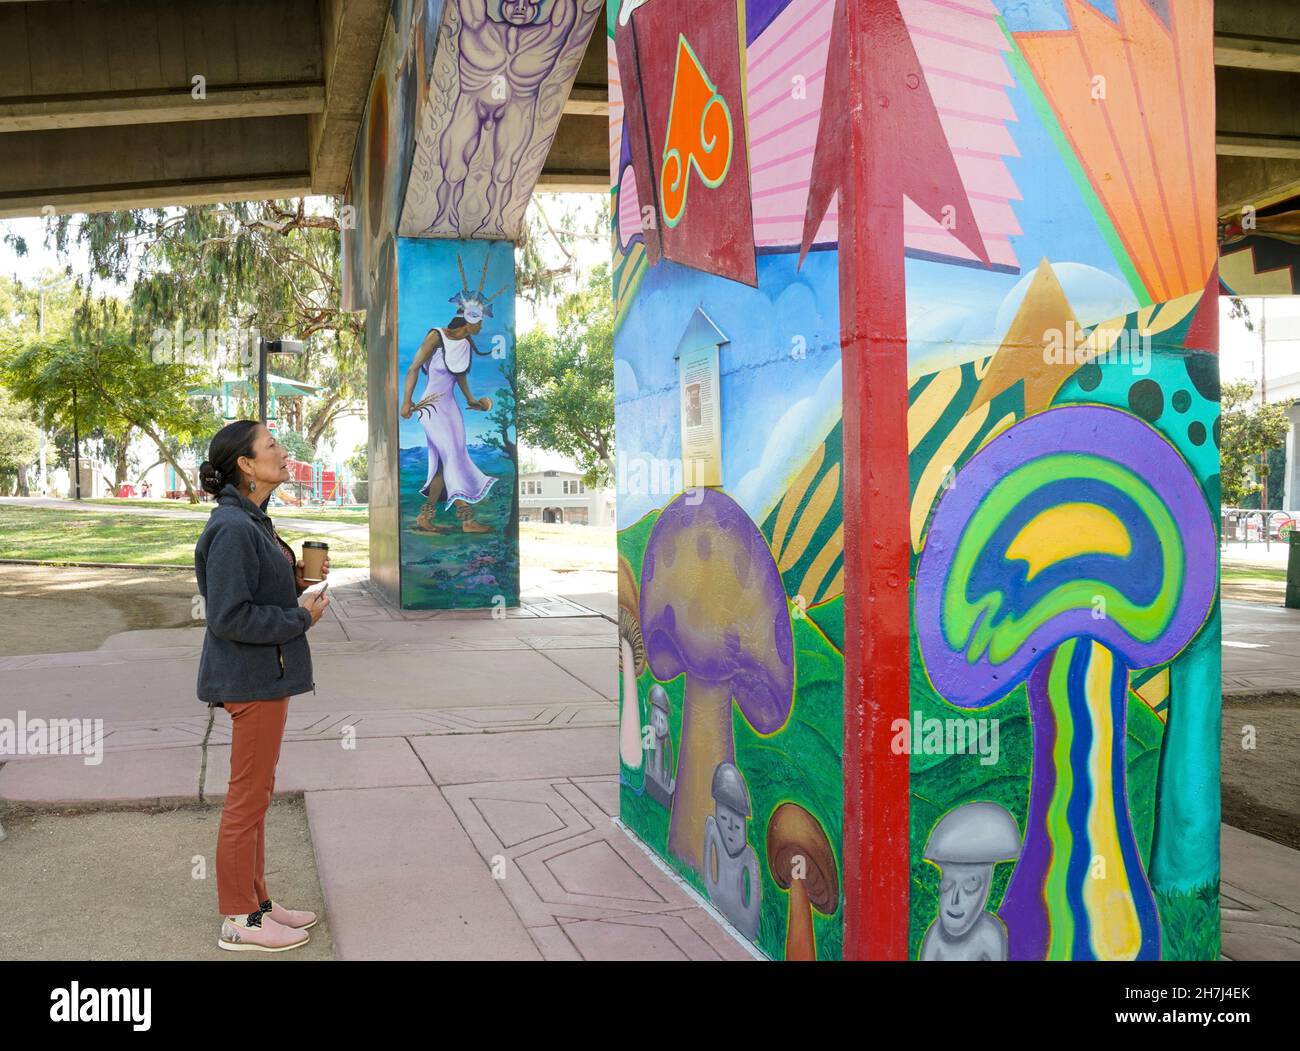 San Diego, United States of America. 28 September, 2021. U.S Interior Secretary Deb Haaland tours the historic murals at Chicano Park September 28, 2021 in San Diego, California. The park located under the San Diego- Coronado Bridge contains the largest collection of outdoor murals in the United States.  Credit: Tami A. Heilemann/U.S. Interior Department/Alamy Live News Stock Photo